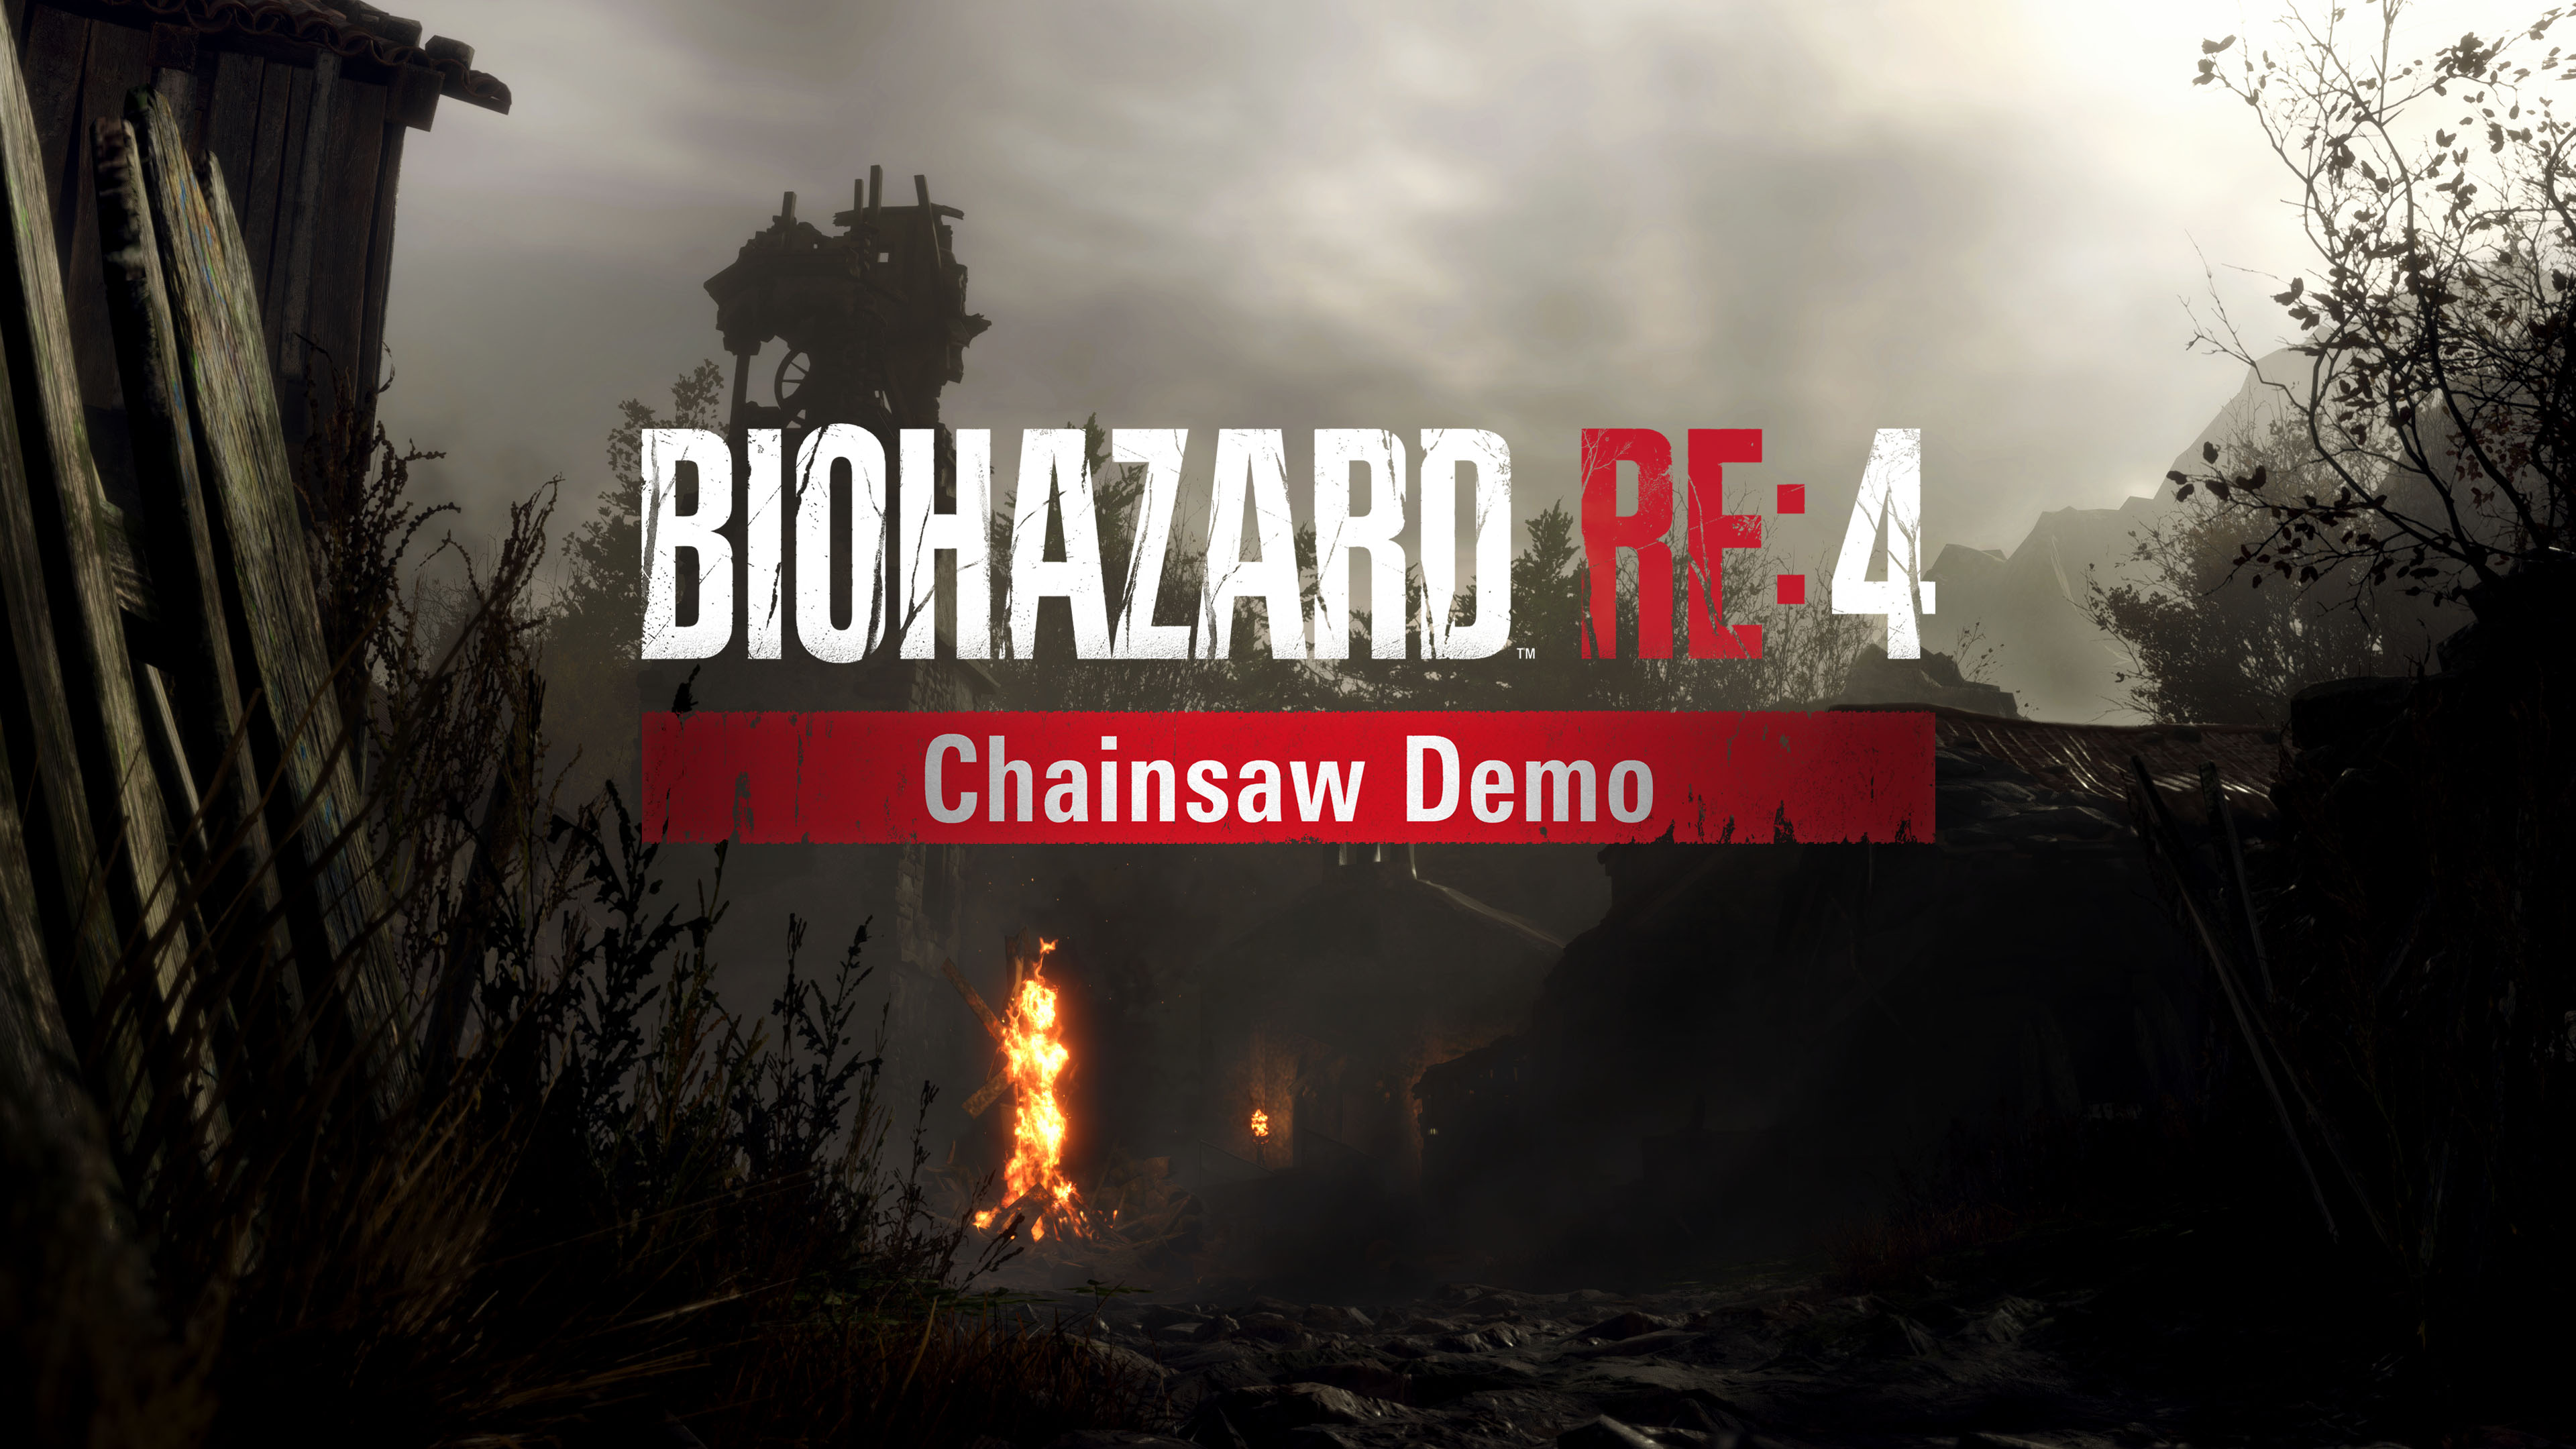 Resident evil 4 Remake Chainsaw Demo base ps4 version with mix of